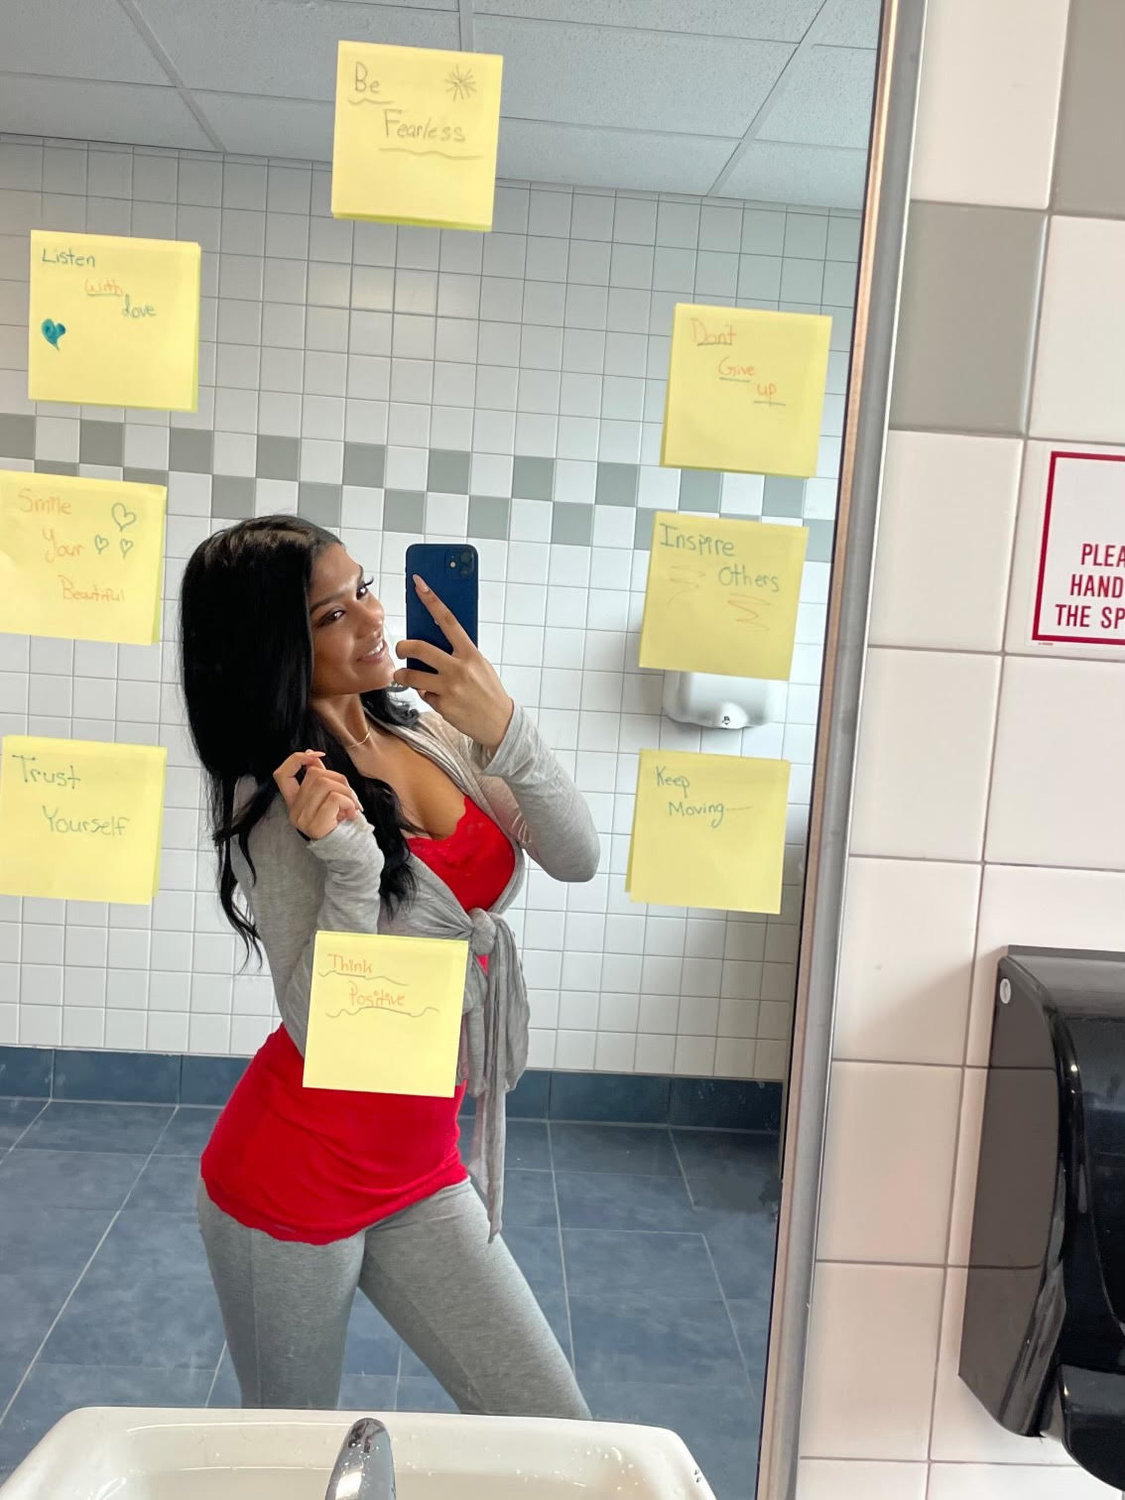 Following the lead of anti-bullying on Dosomething.org and as a victim of bullying, Valarie Goorahoo wrote positive messages on Post-It notes and placed them on the bathroom mirror of her school to help motivate others.